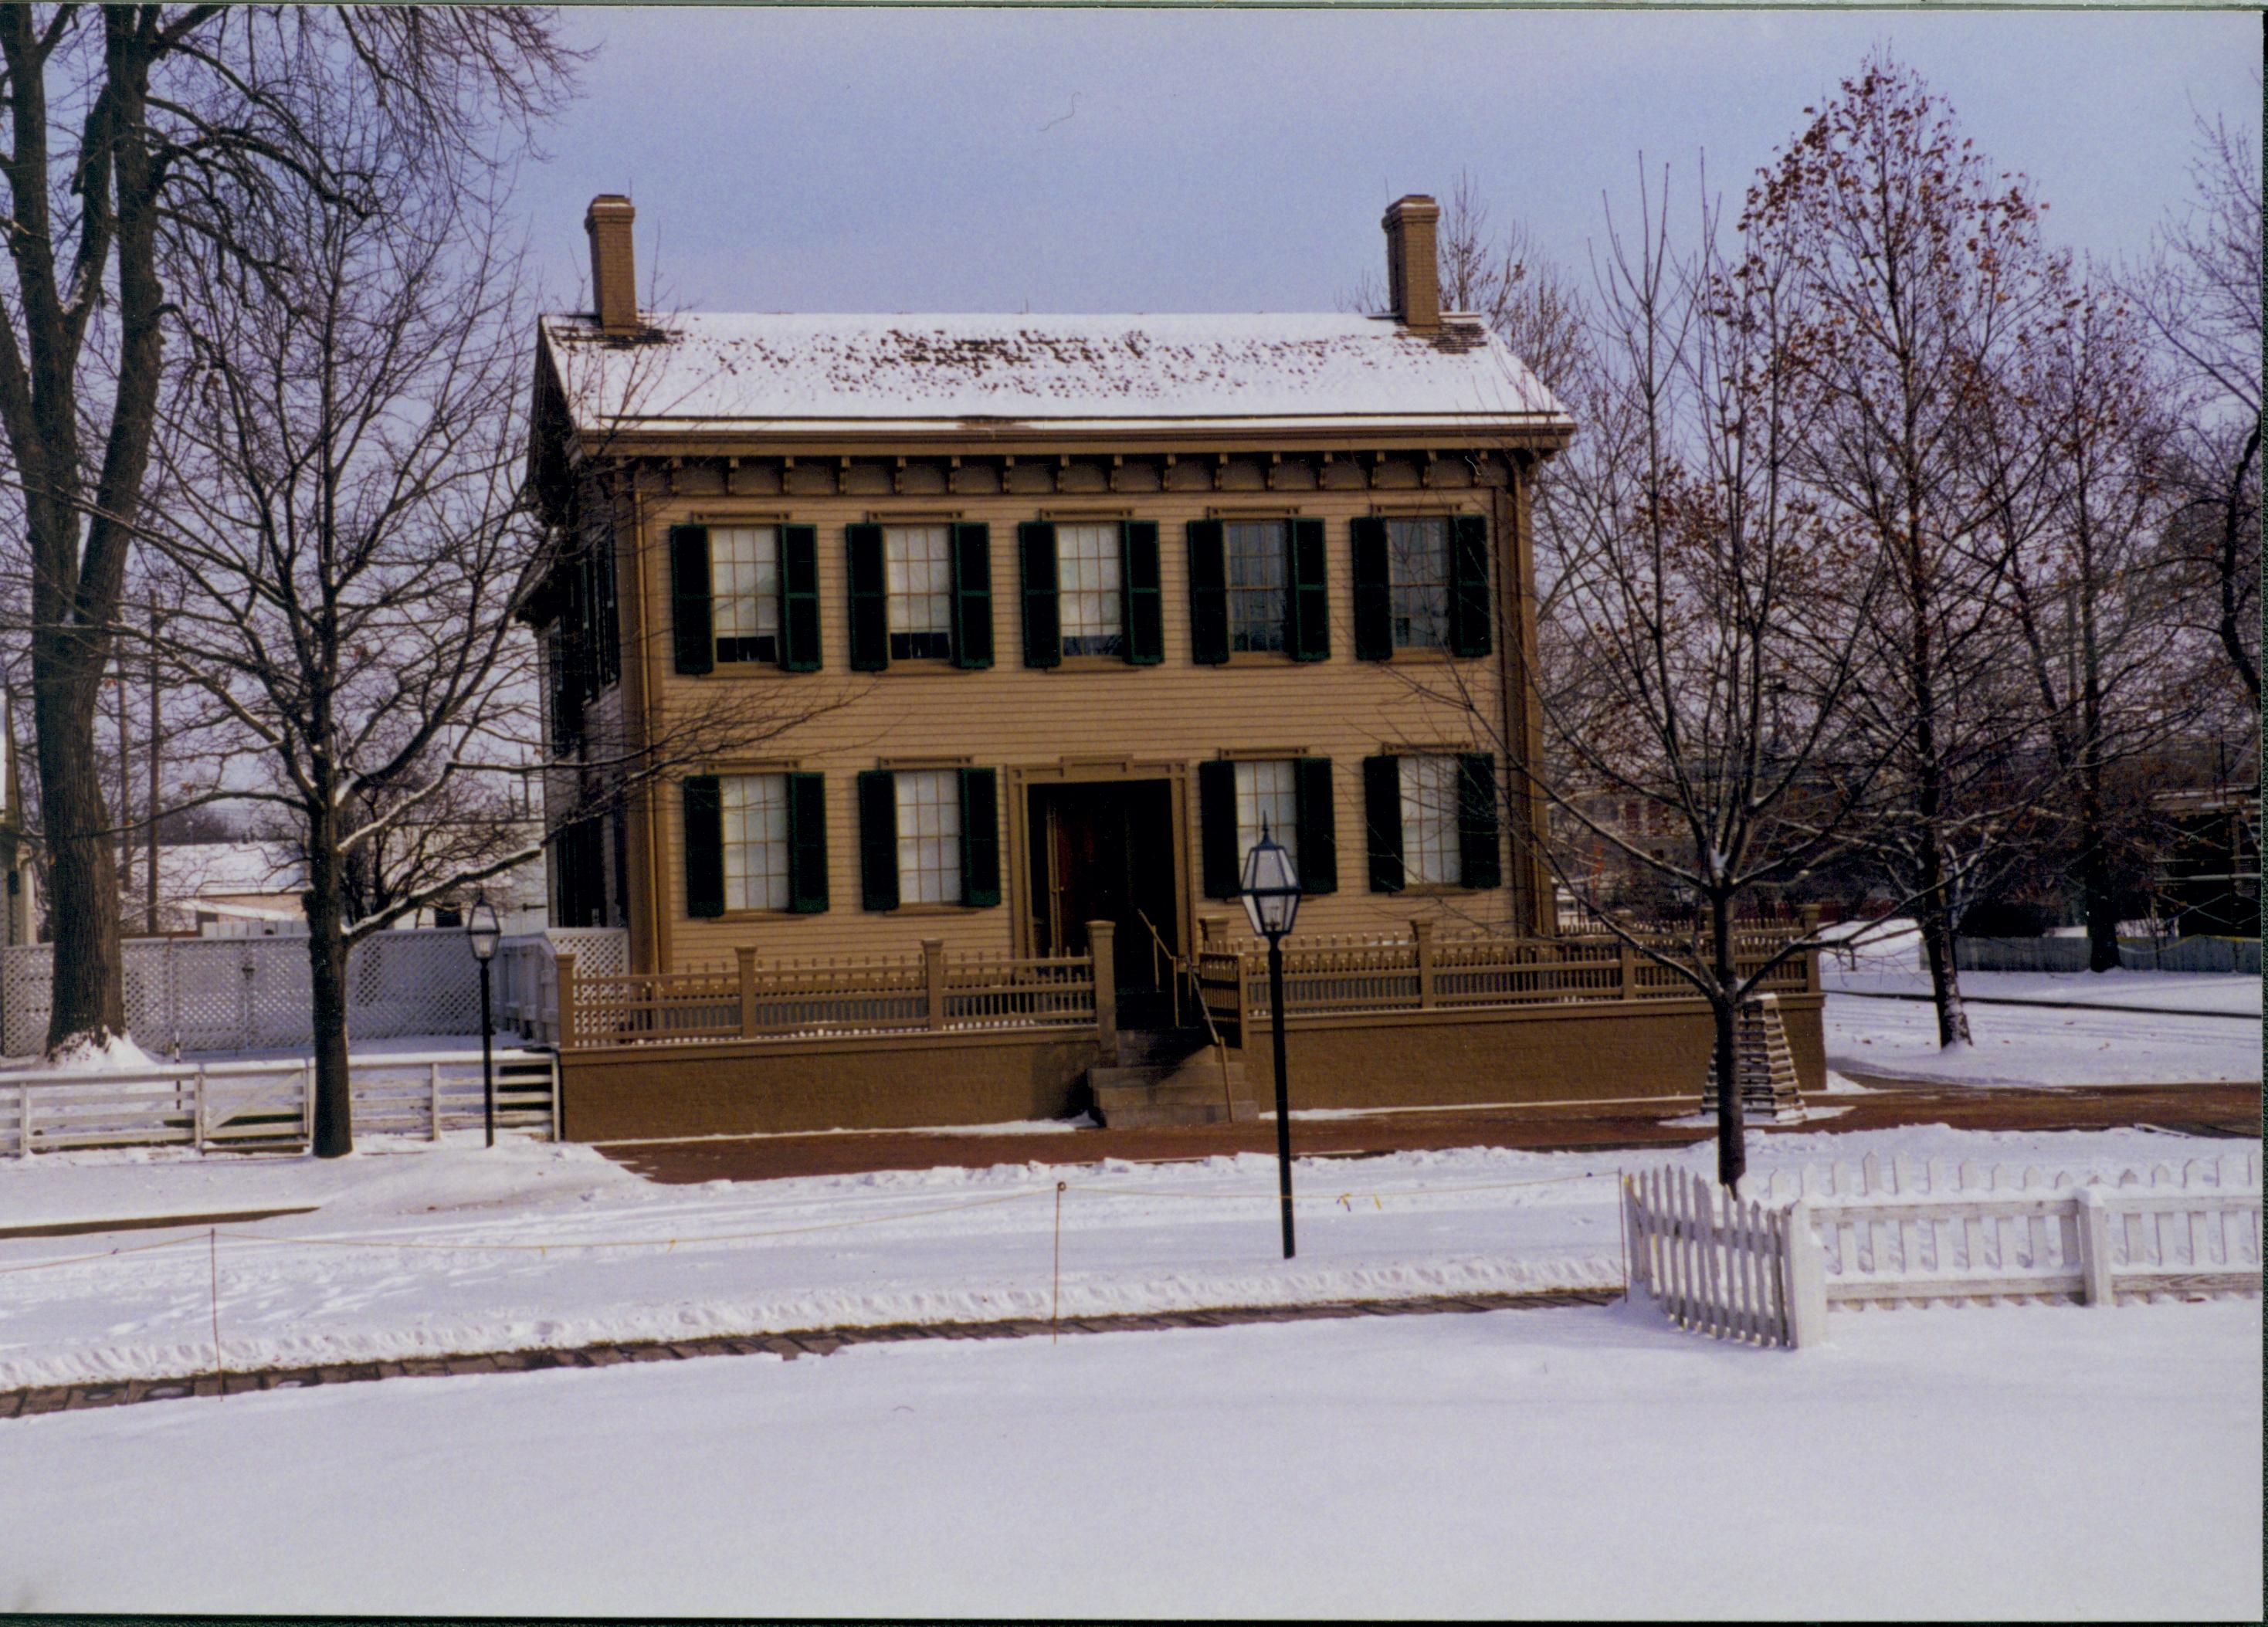 Lincoln Home in the snow, cleared brick plaza in front. Elm tree in cage on right, fences for the Carrigan lot on left, and Burch lot in foreground right. Back corner of Arnold House just visible on far right. Looking East from Brown lot, Block 7, Lot 10 snow, Lincoln Home, brick plaza, elm tree, fences, 8th Street, Carrigan, Brown lot, Arnold